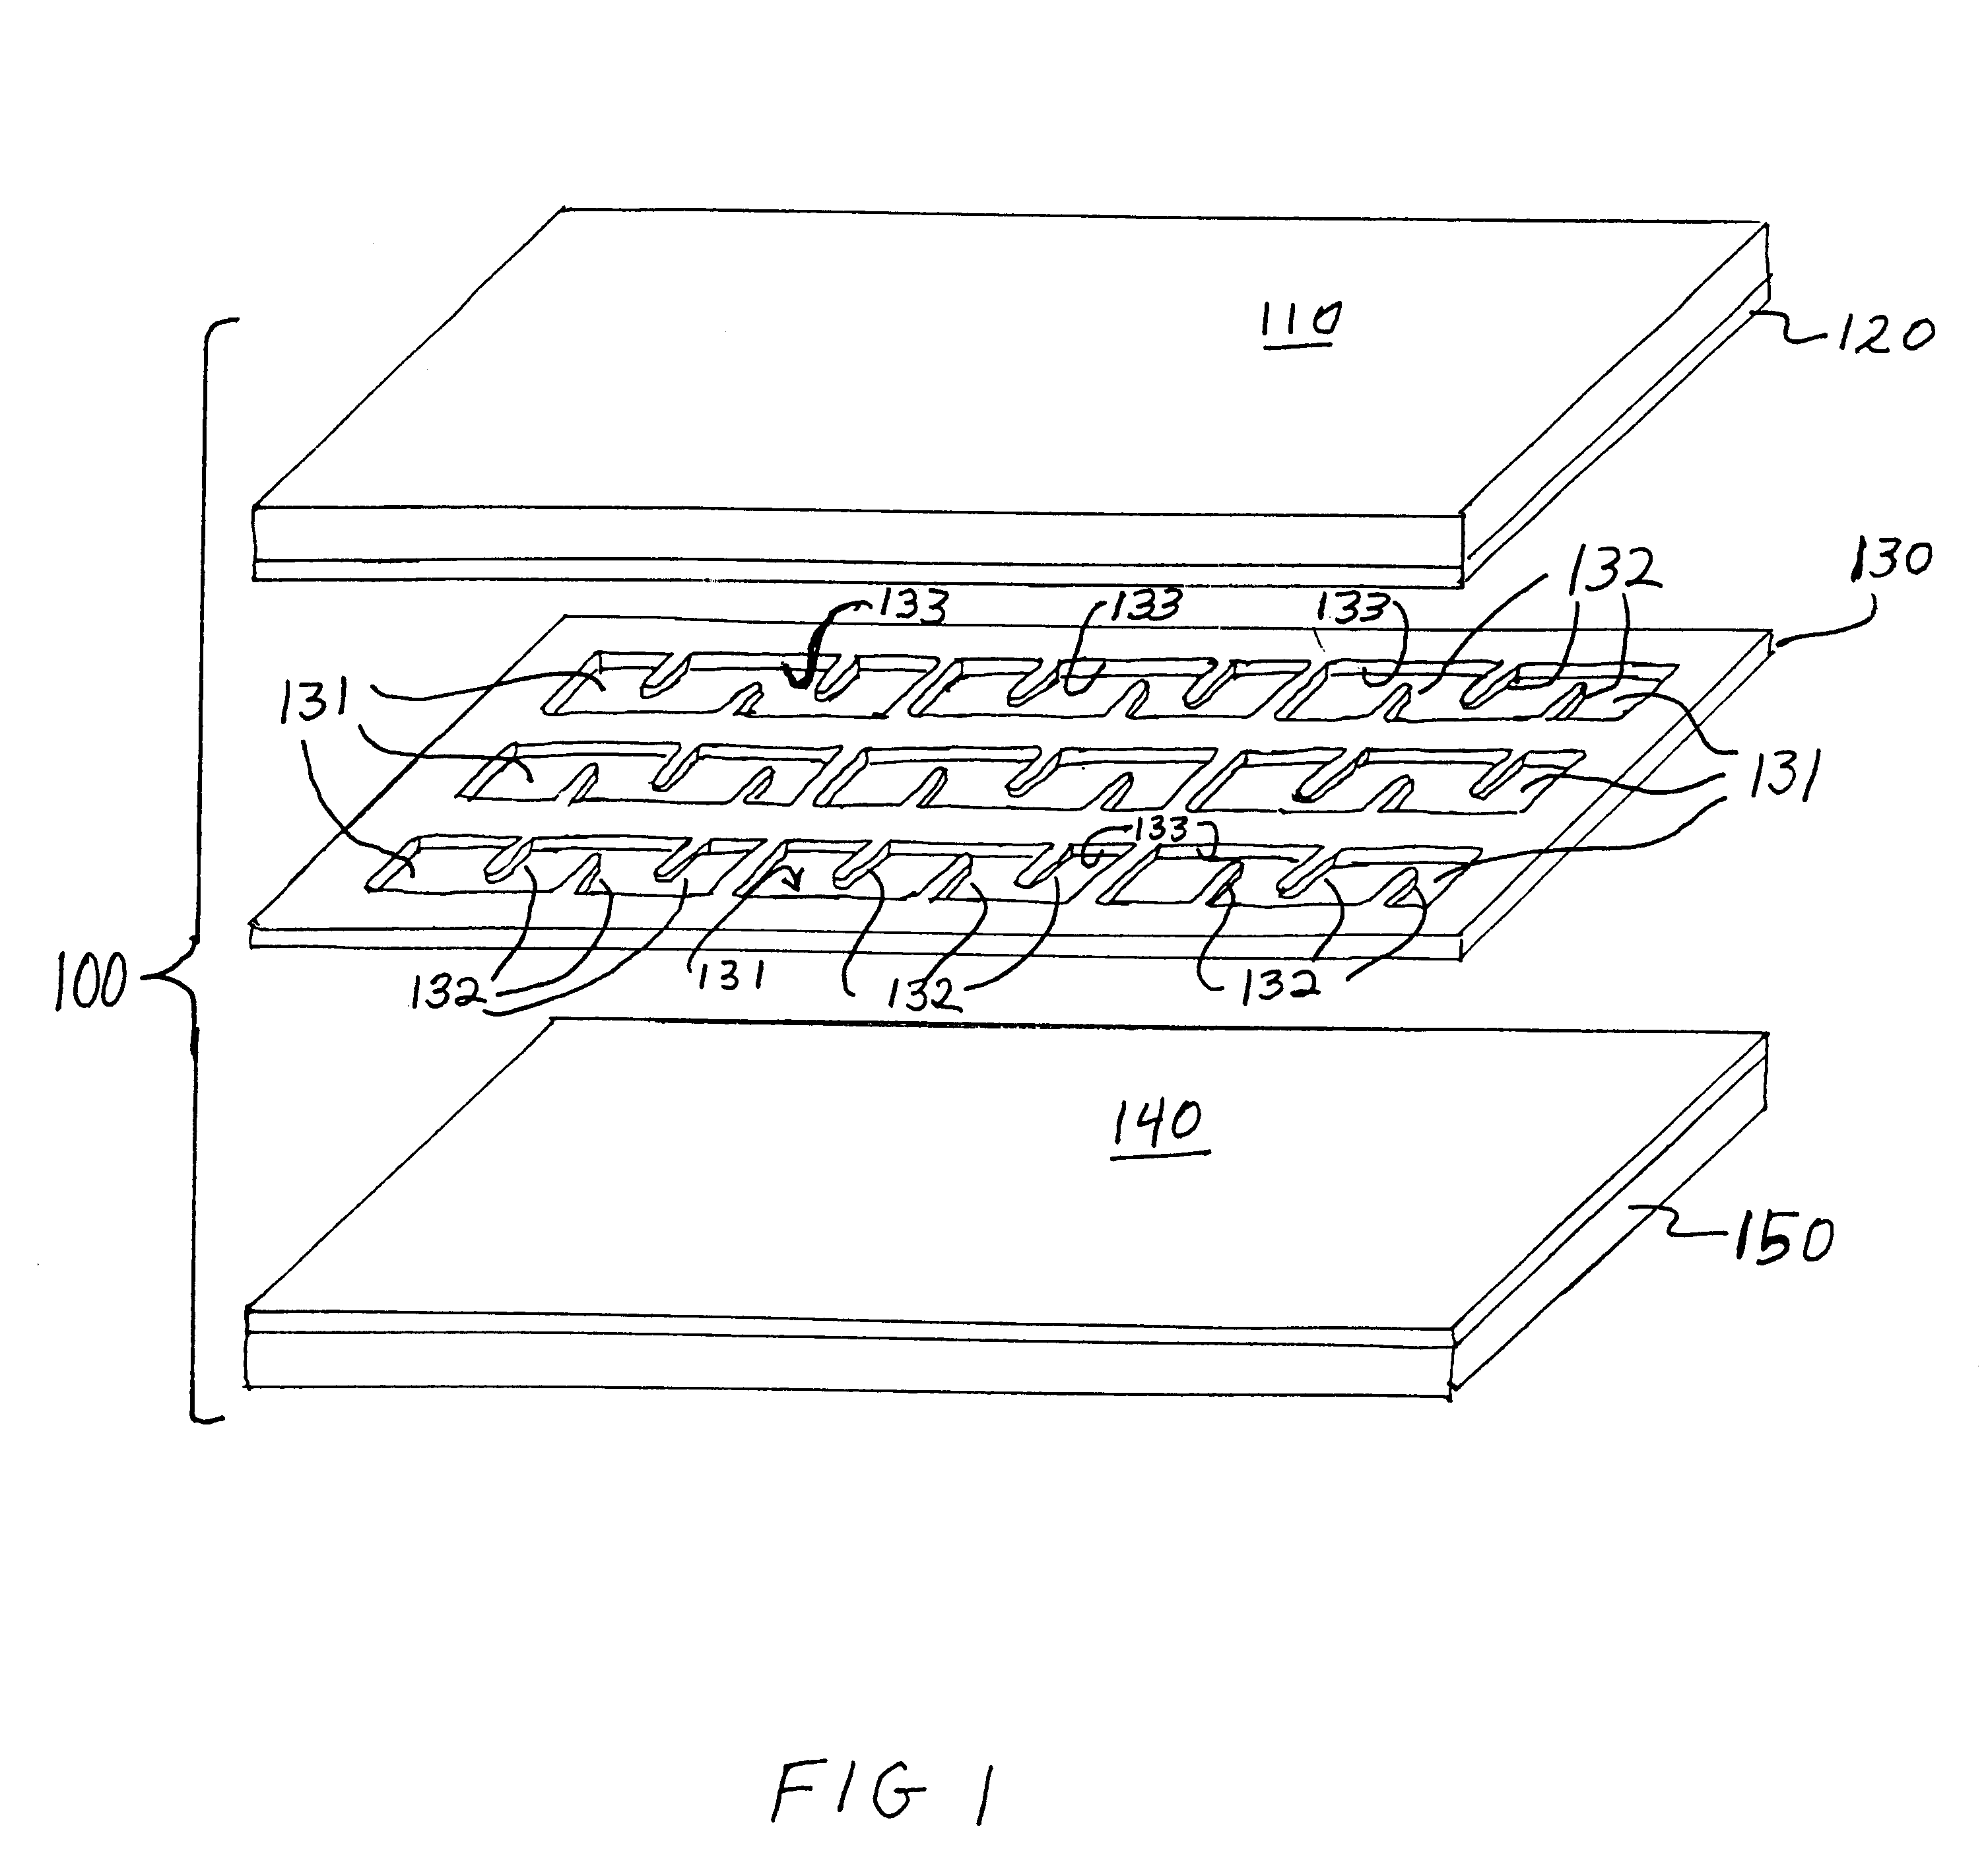 Pressure activated switching device